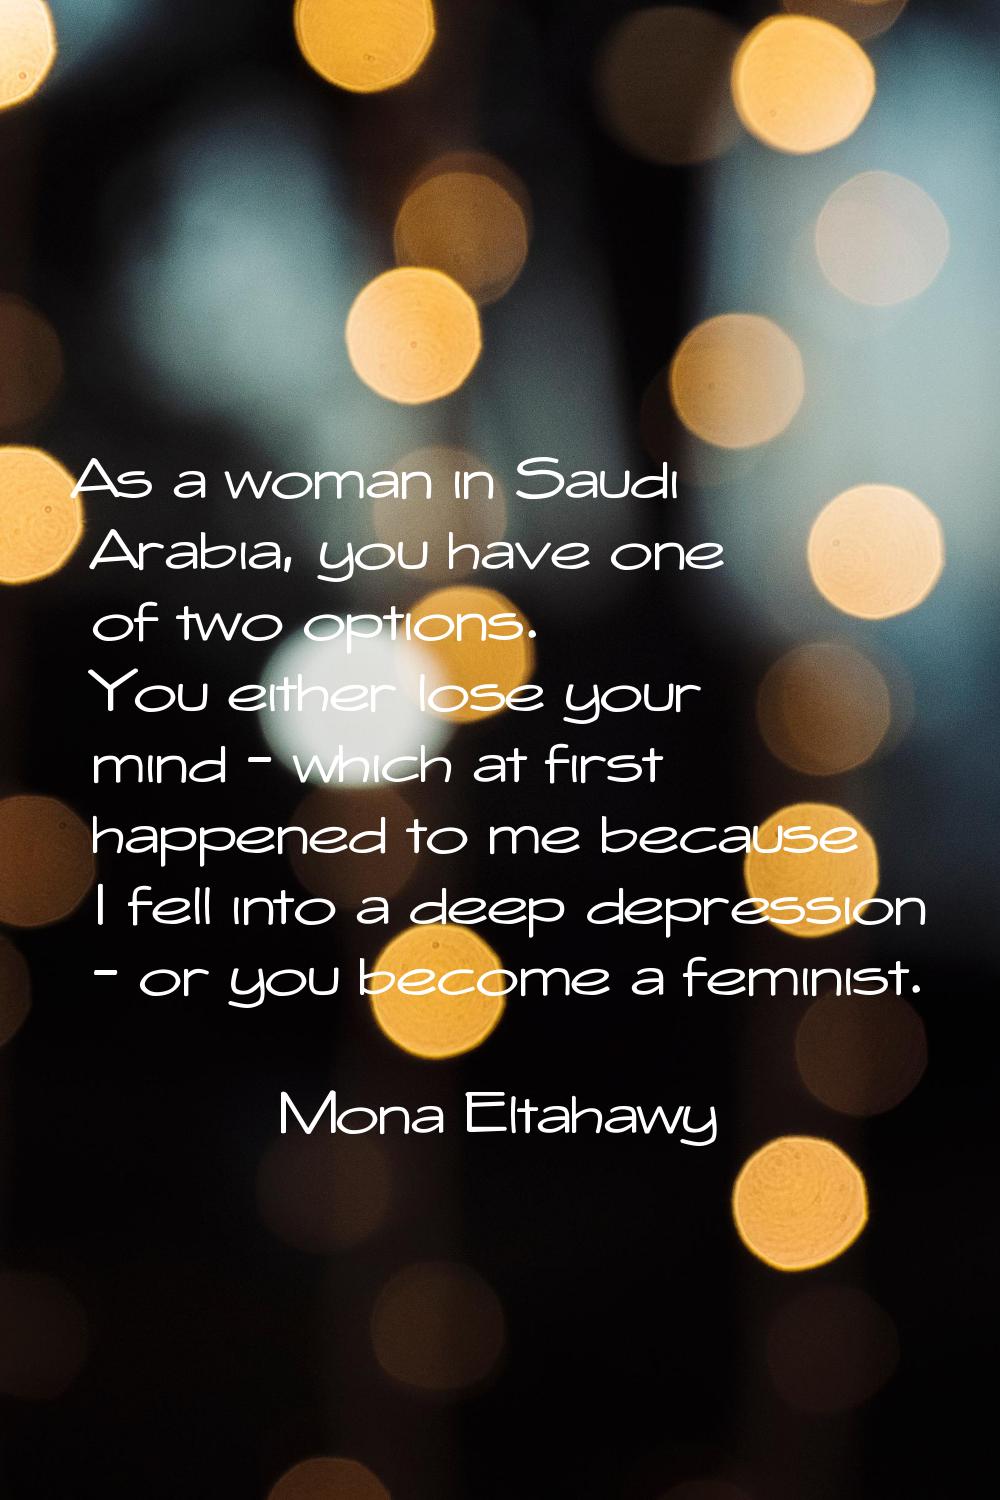 As a woman in Saudi Arabia, you have one of two options. You either lose your mind - which at first